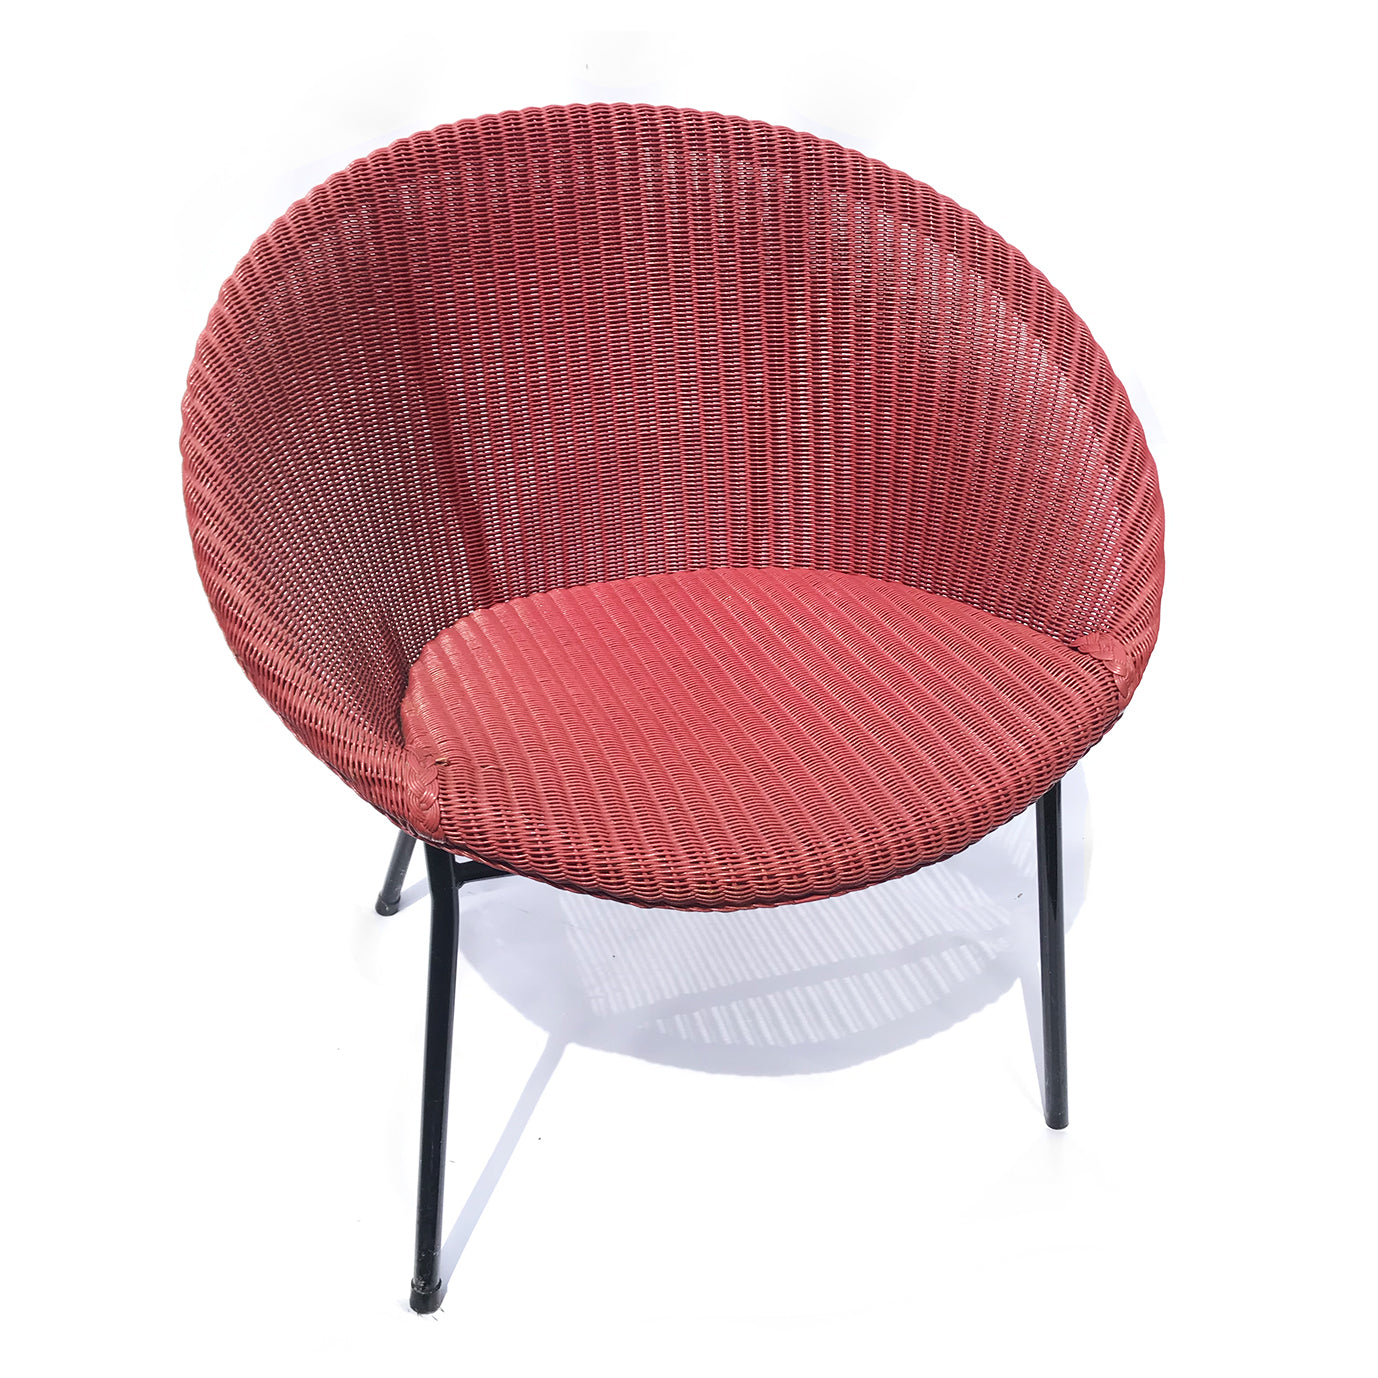 Cool LLoyd Loom Lusty Satellite Chair in its original Rhubarb colour with black metal frame - SHOP NOW - www.intovintage.co.uk